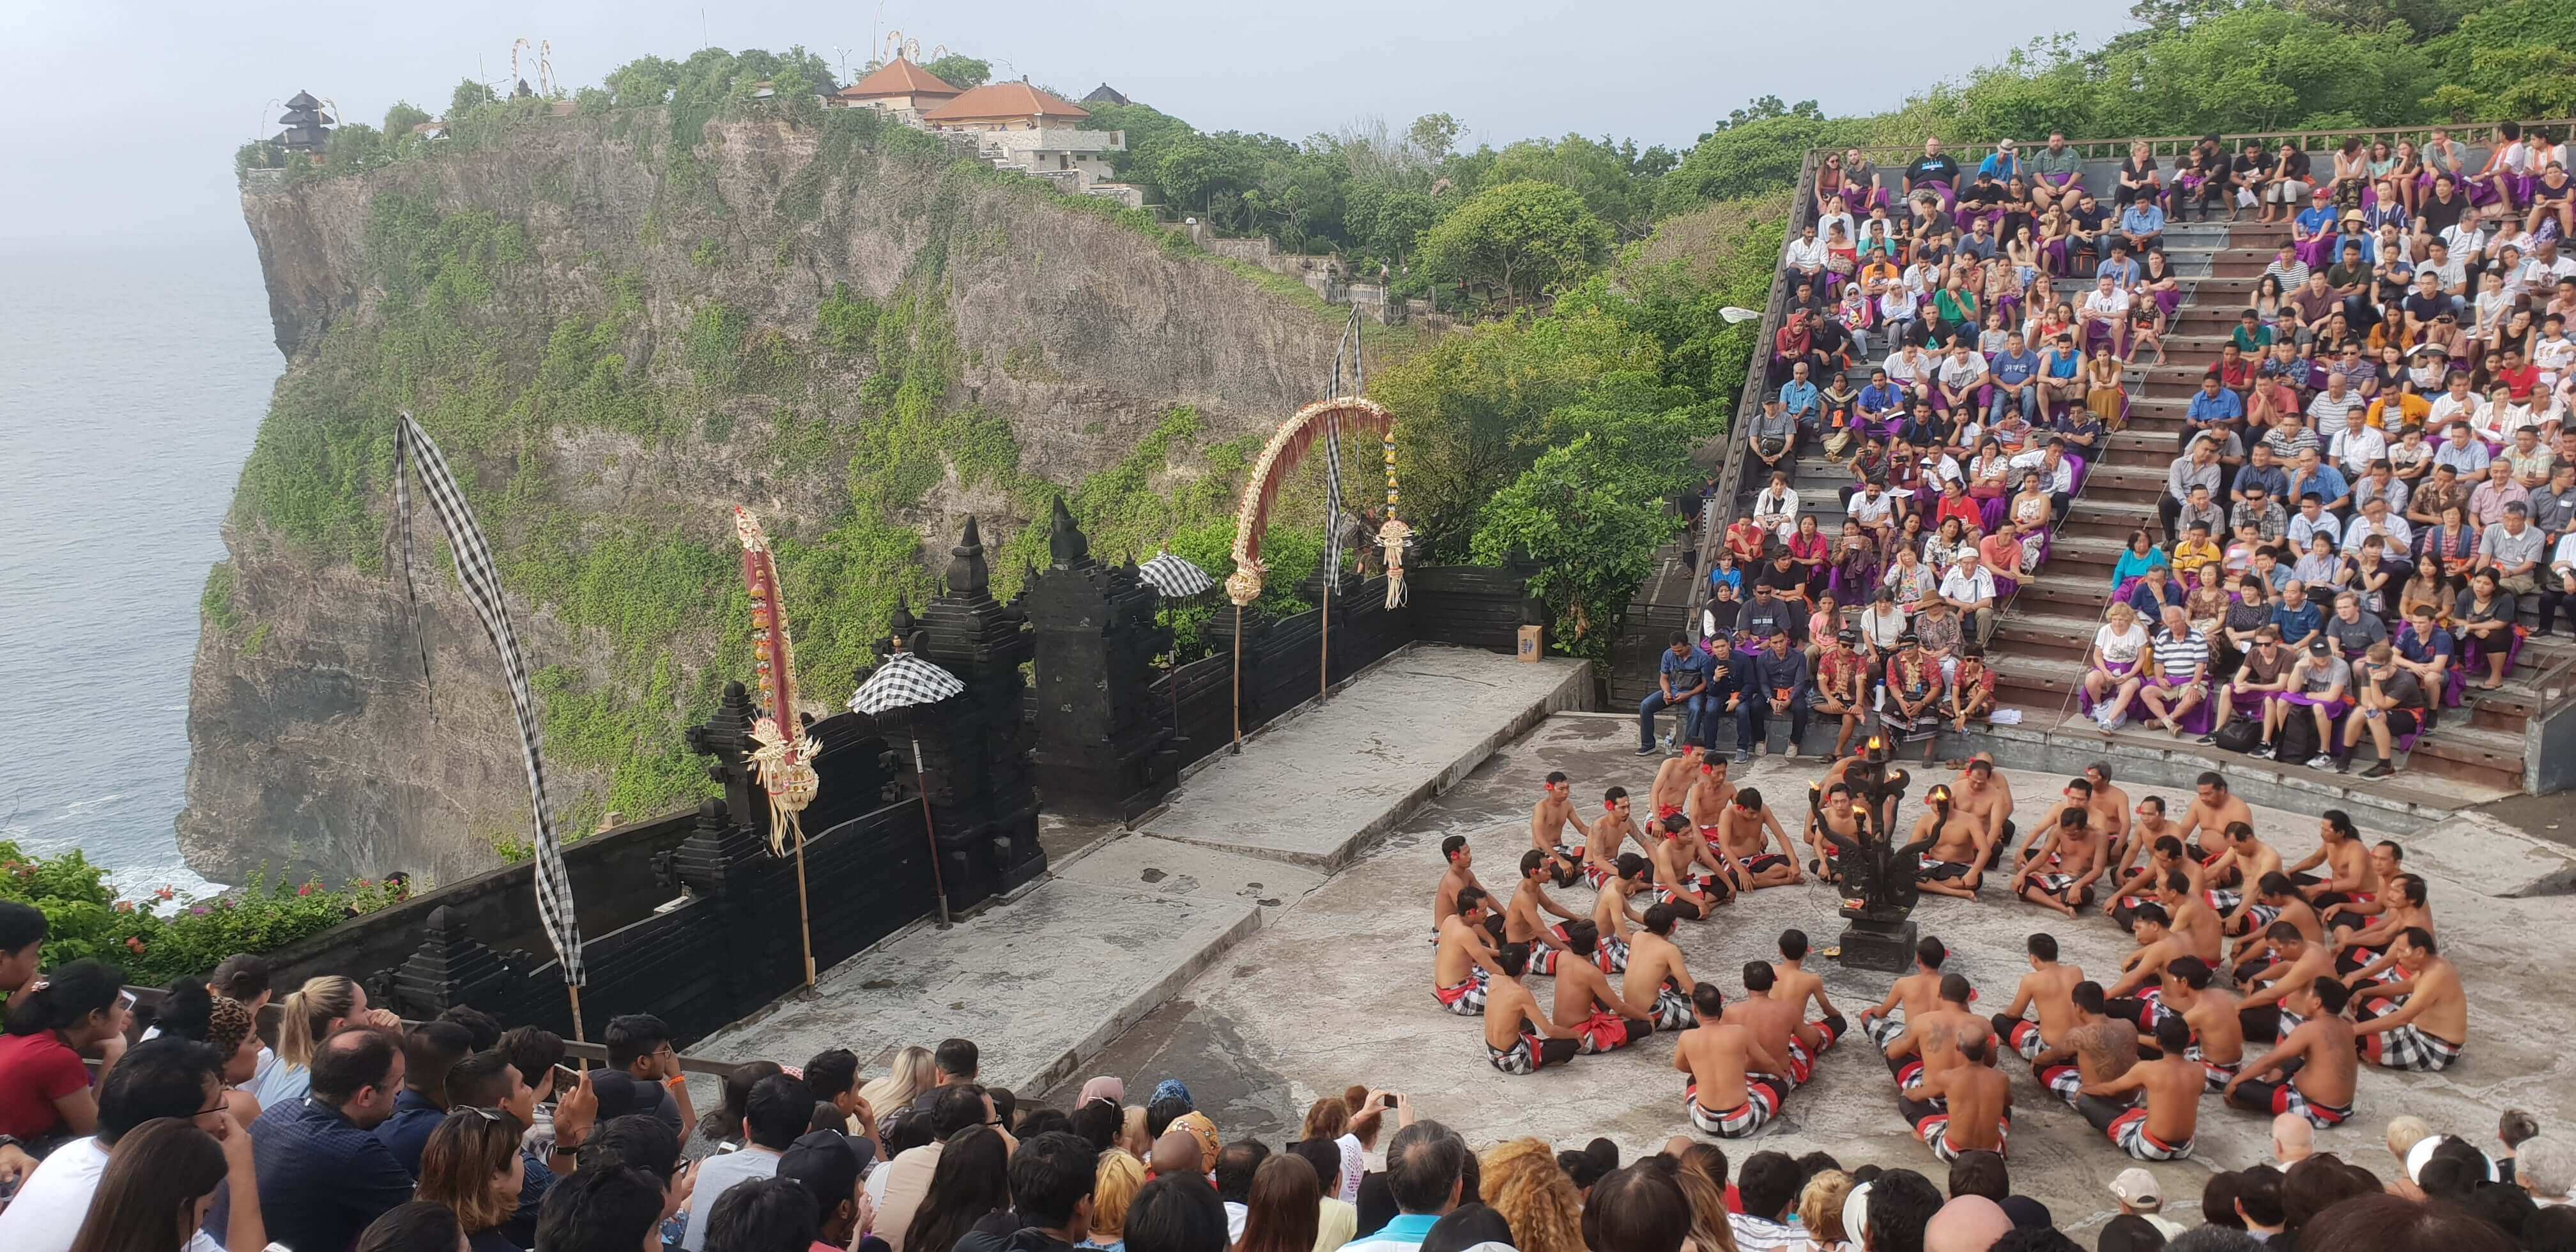 Watching the Kecak and Fire dance show is an activity you have to do in Uluwatu as it gives you a true reflection of the Balinese culture and 